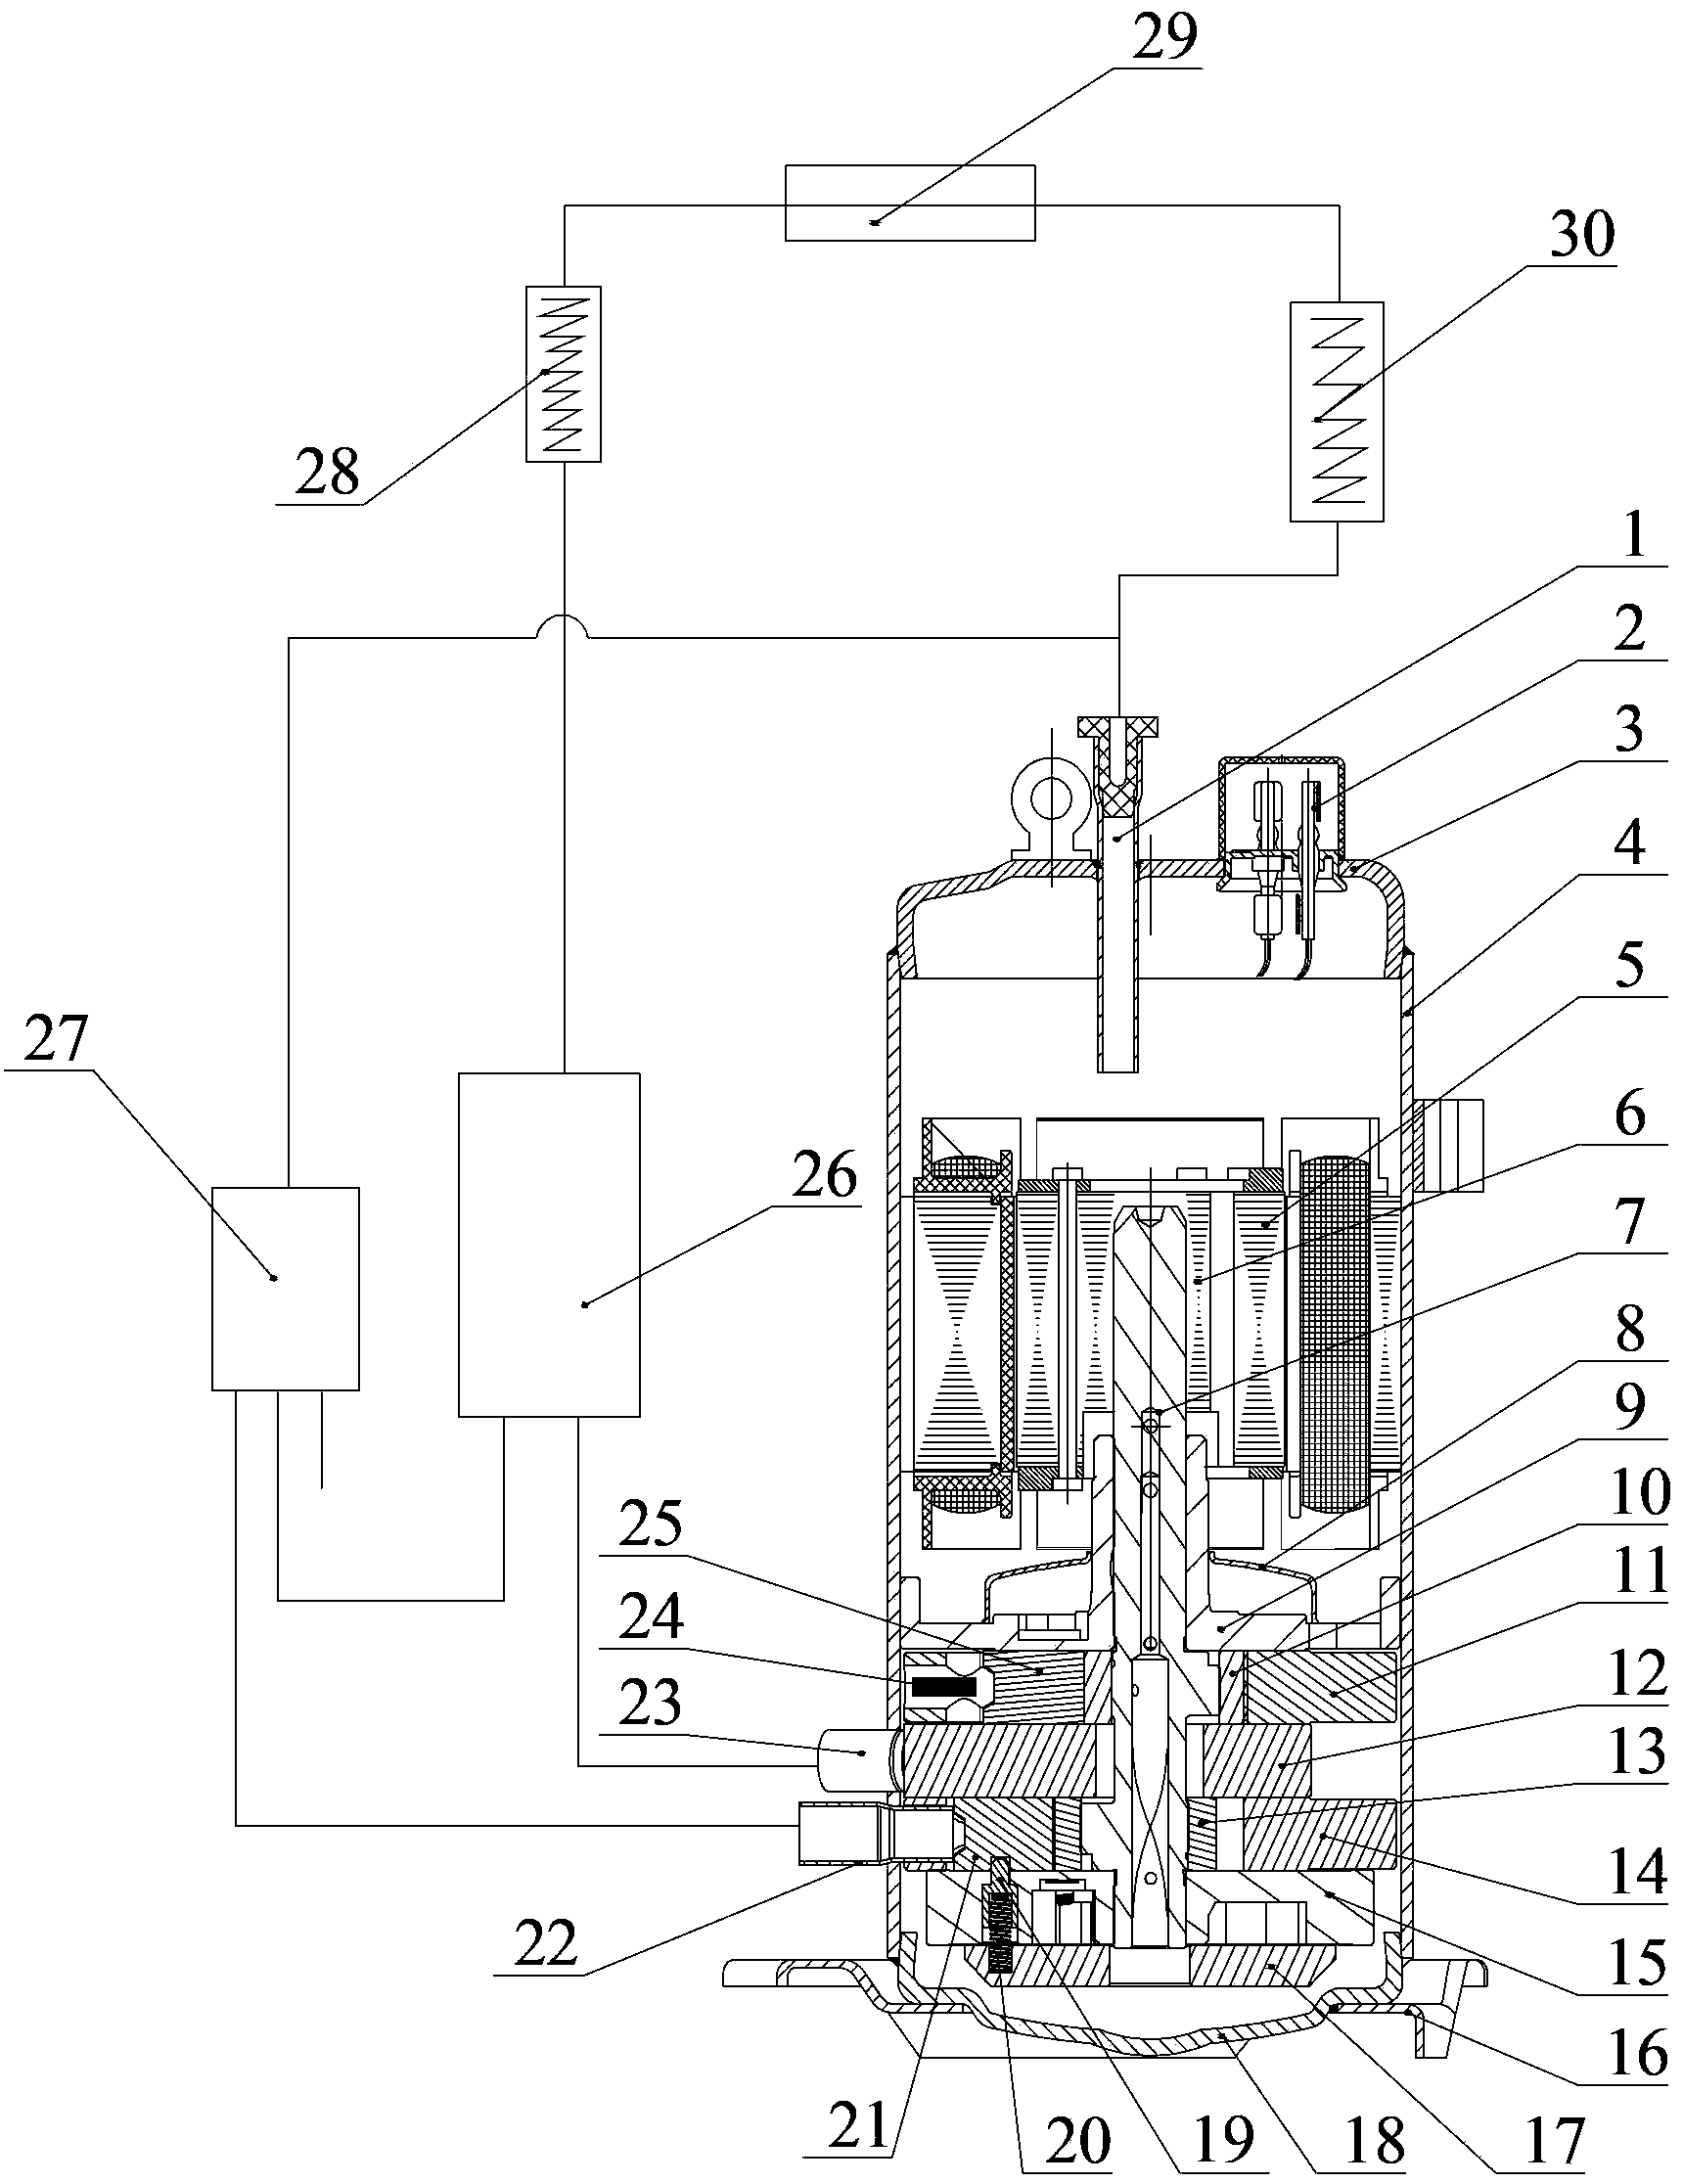 Compressor and refrigeration system provided with same